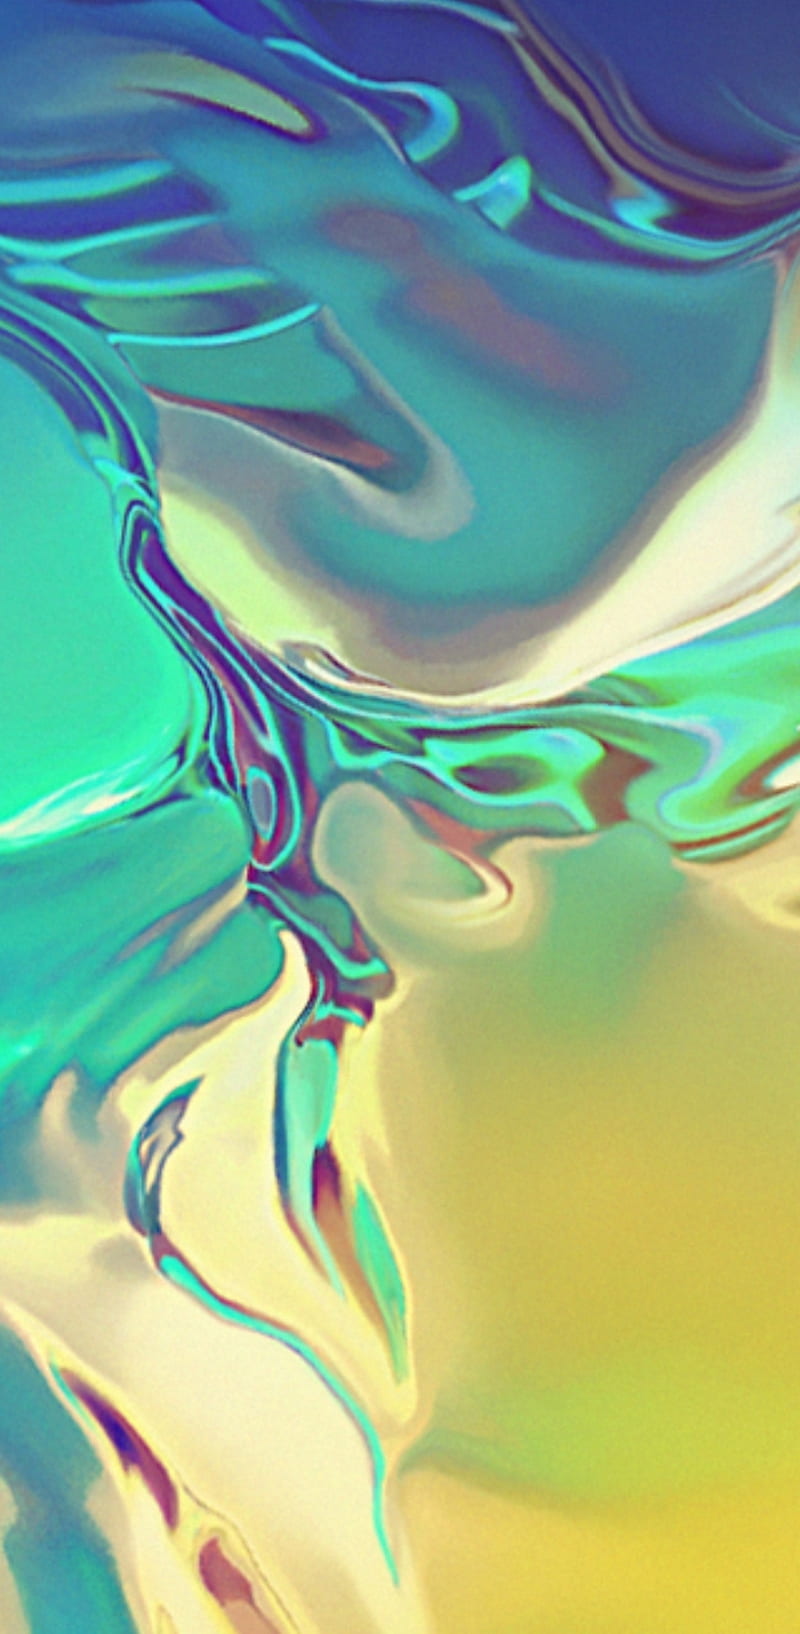 S10e Canary Yellow 3, colours, colorful, theme, s10, galaxy, HD phone wallpaper